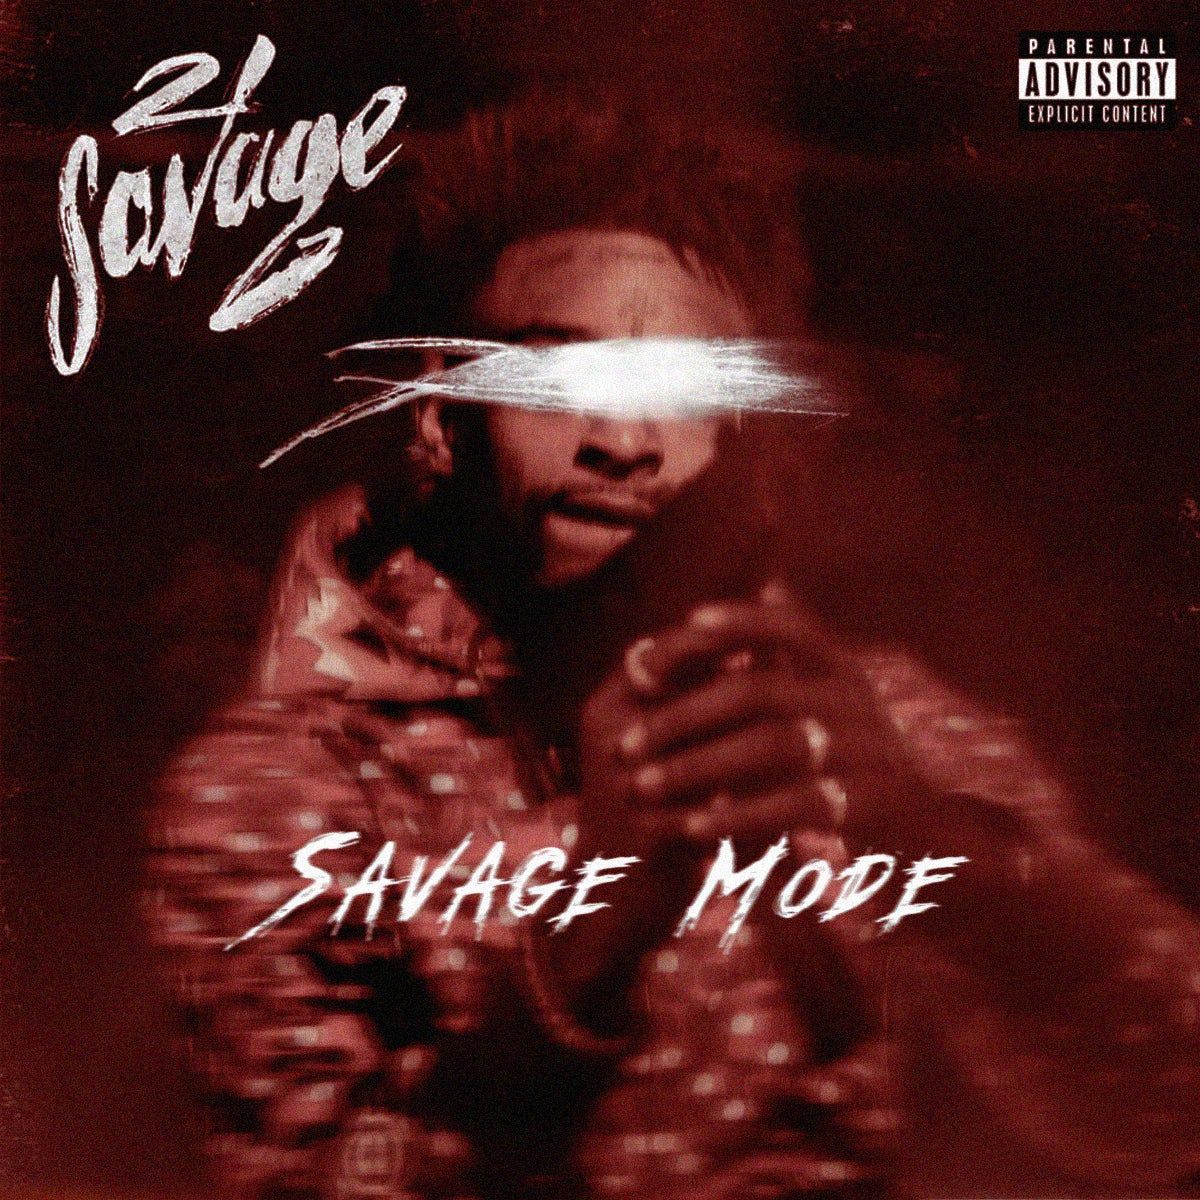 Preview of a 21 savage project I'm working on which displays each album in each the style of every other album. This is Savage Mode in the style of I am >